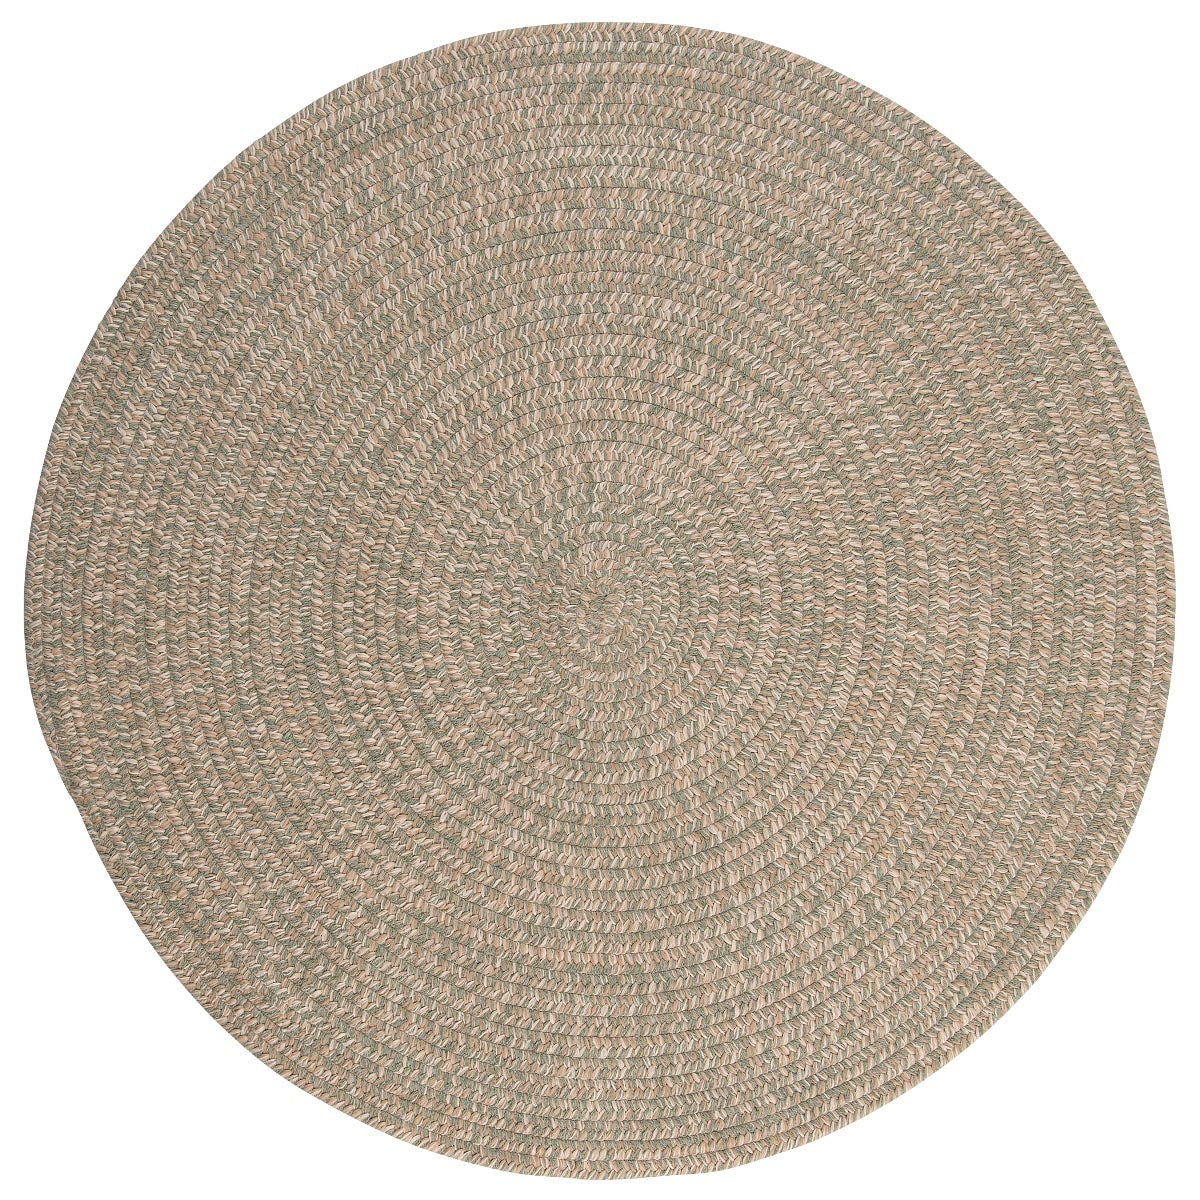 Tremont Palm Outdoor Braided Round Rugs